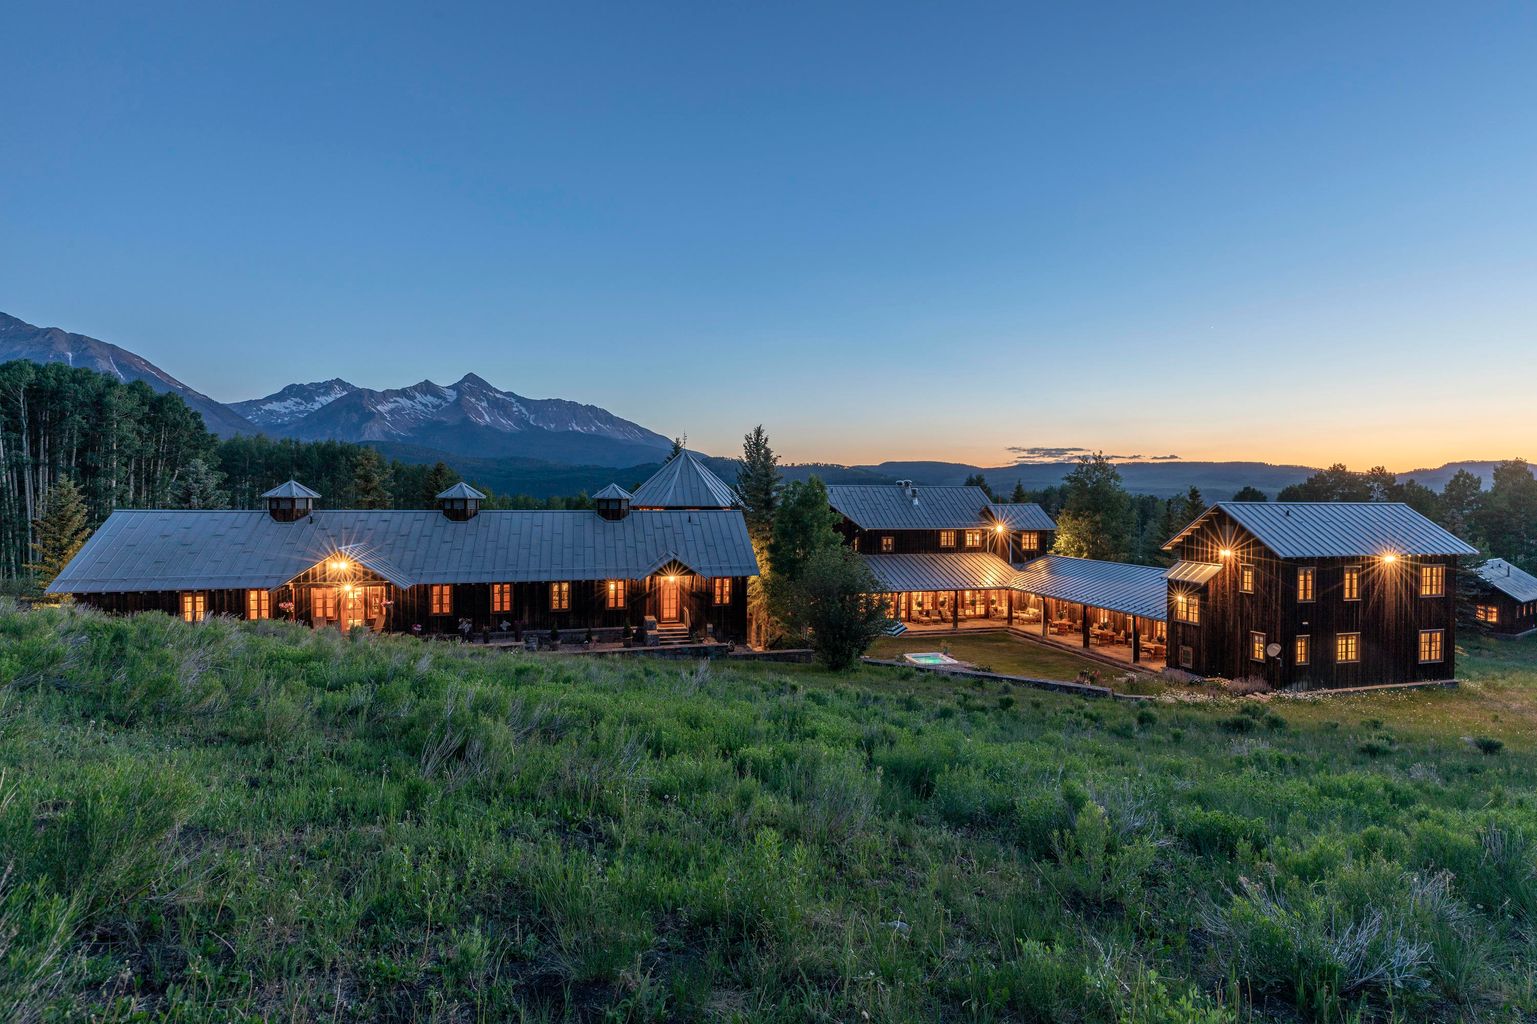 No Need To Zigzag: Telluride’s Z Ranch Will Take You To The Zenith